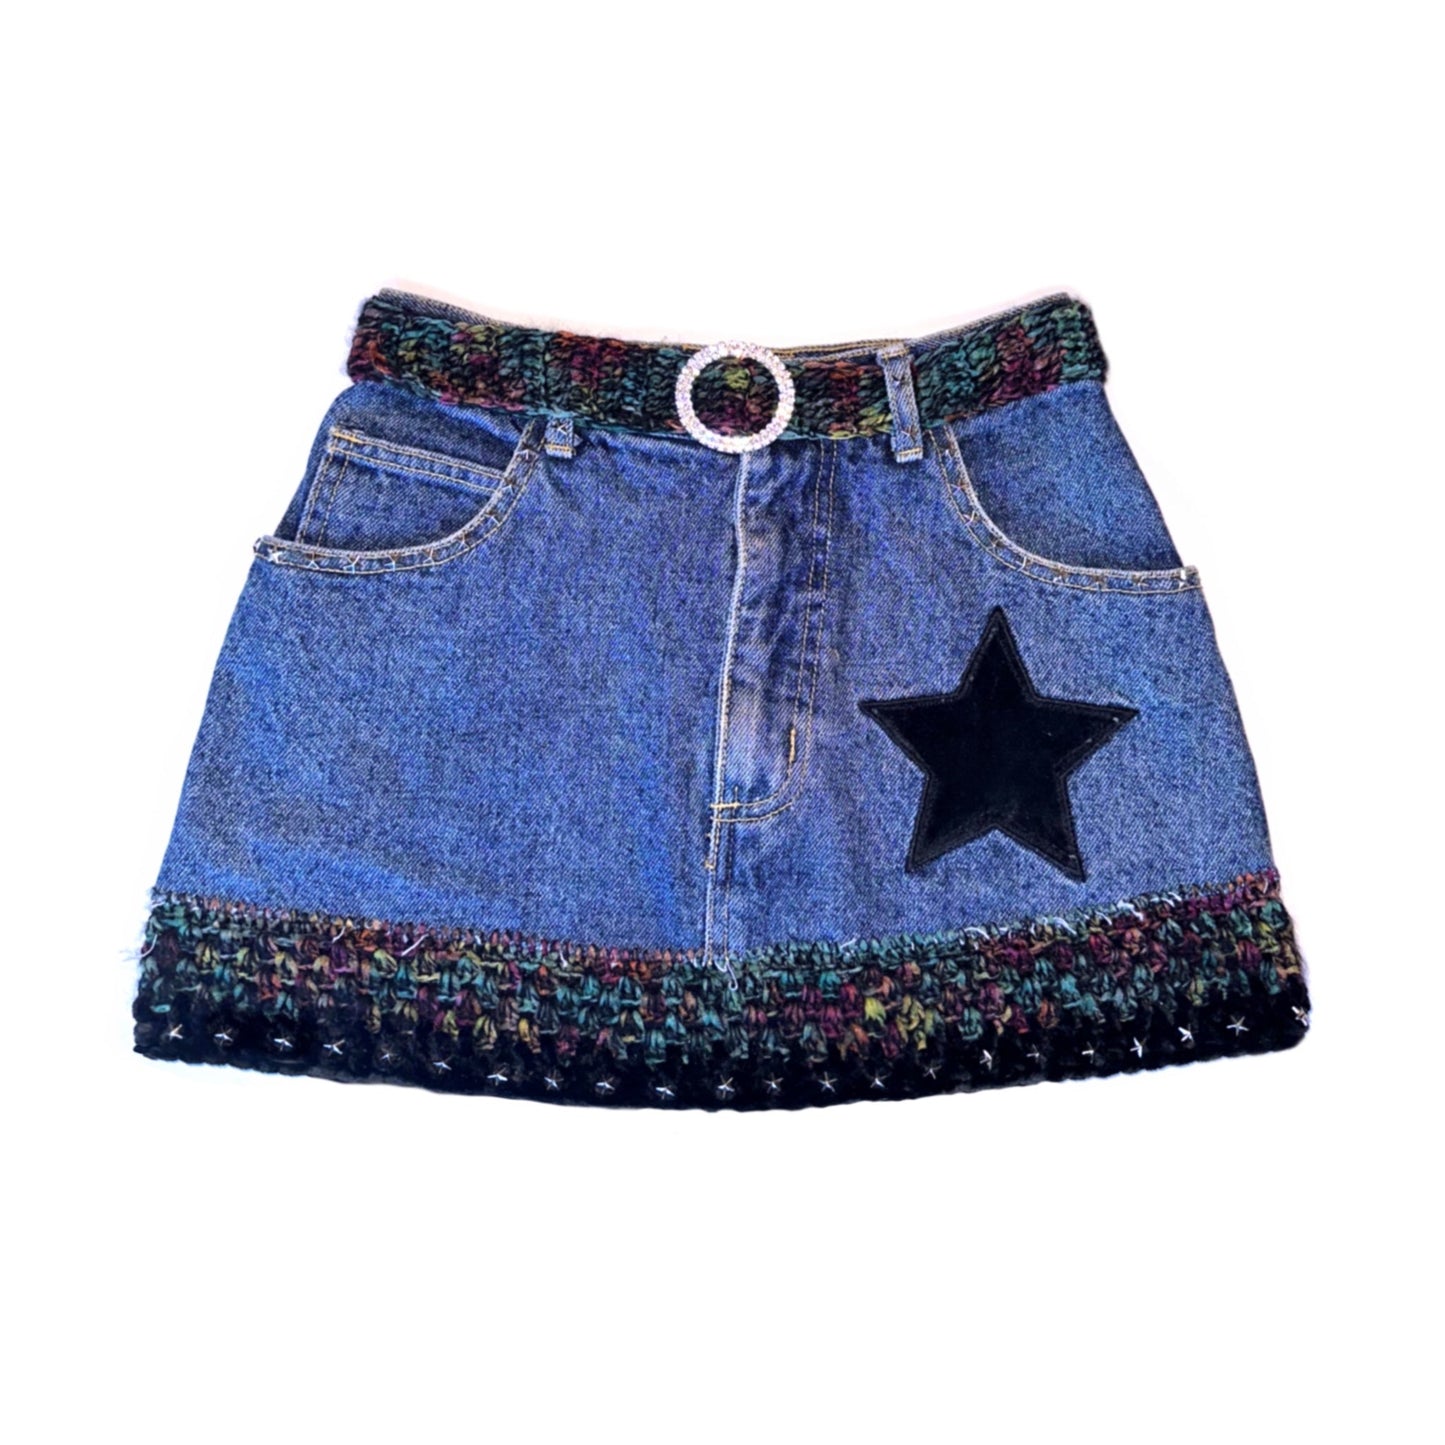 Vintage Jean Guess Skirt Revamped into a Two Piece Velvet Star Bra and Mini Skirt with Crochet Trim and Rhinestone Buckle Belt.